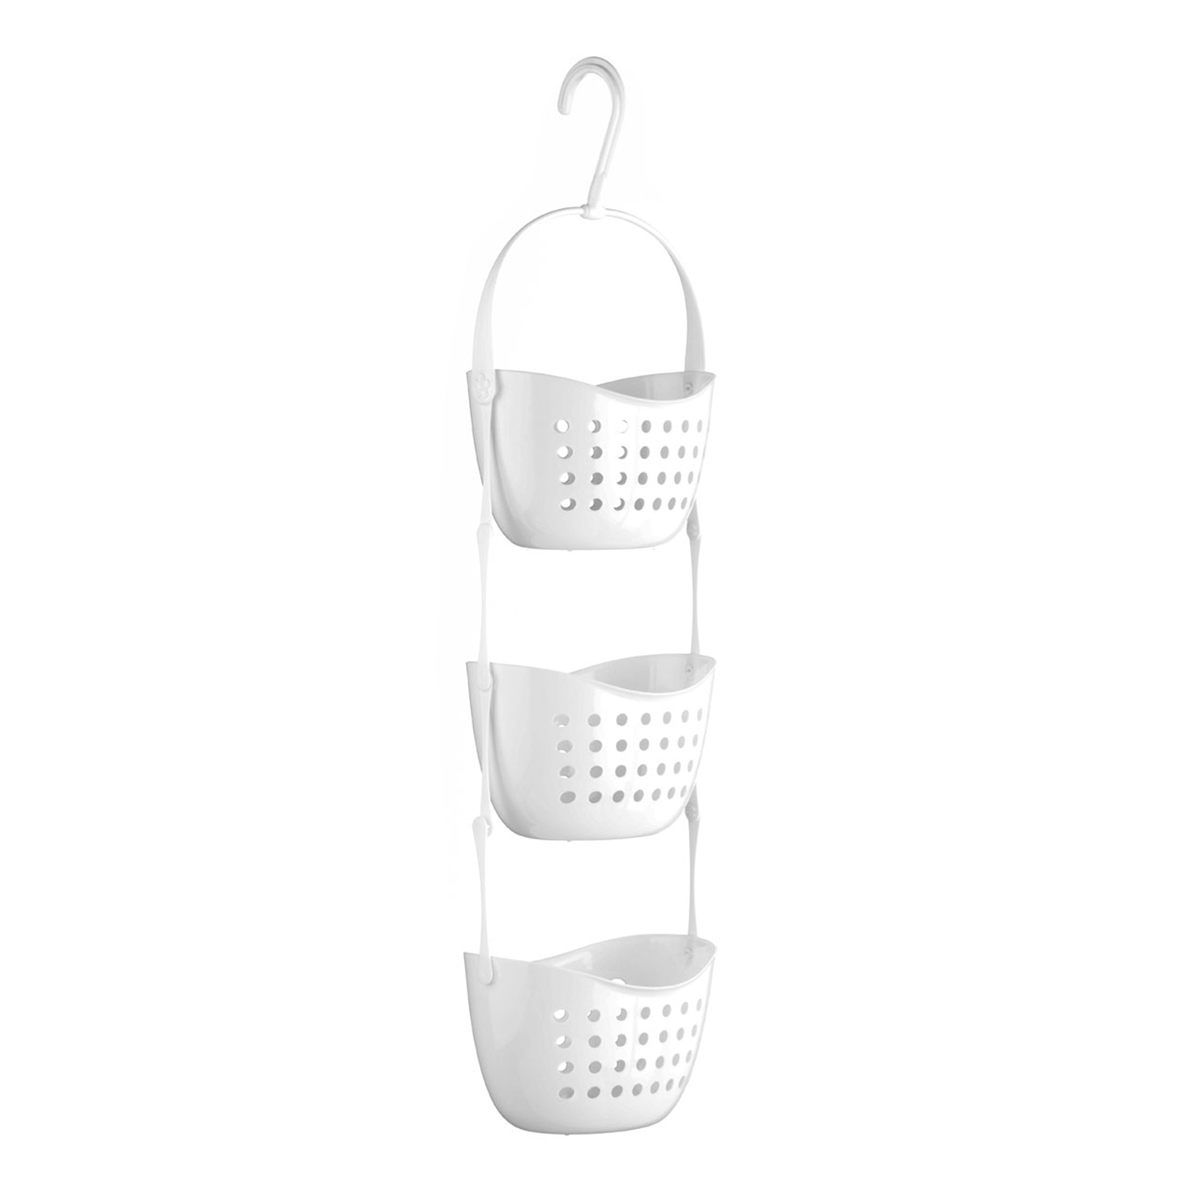 Accents White 3 tier hanging shower caddy